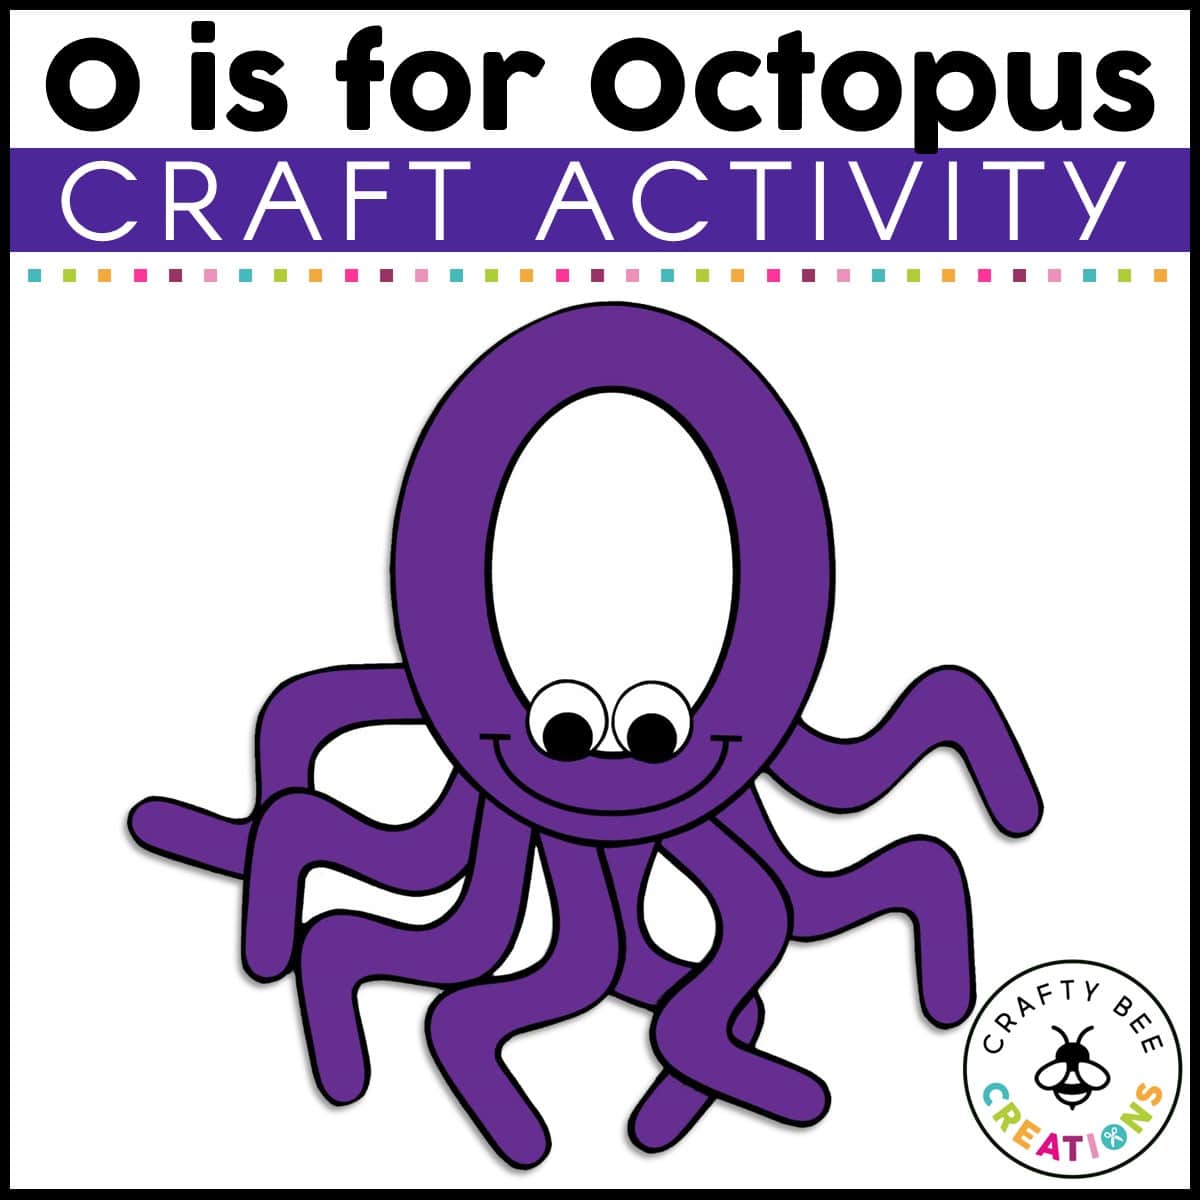 uppercase-letter-o-is-for-octopus-craft-activity-crafty-bee-creations